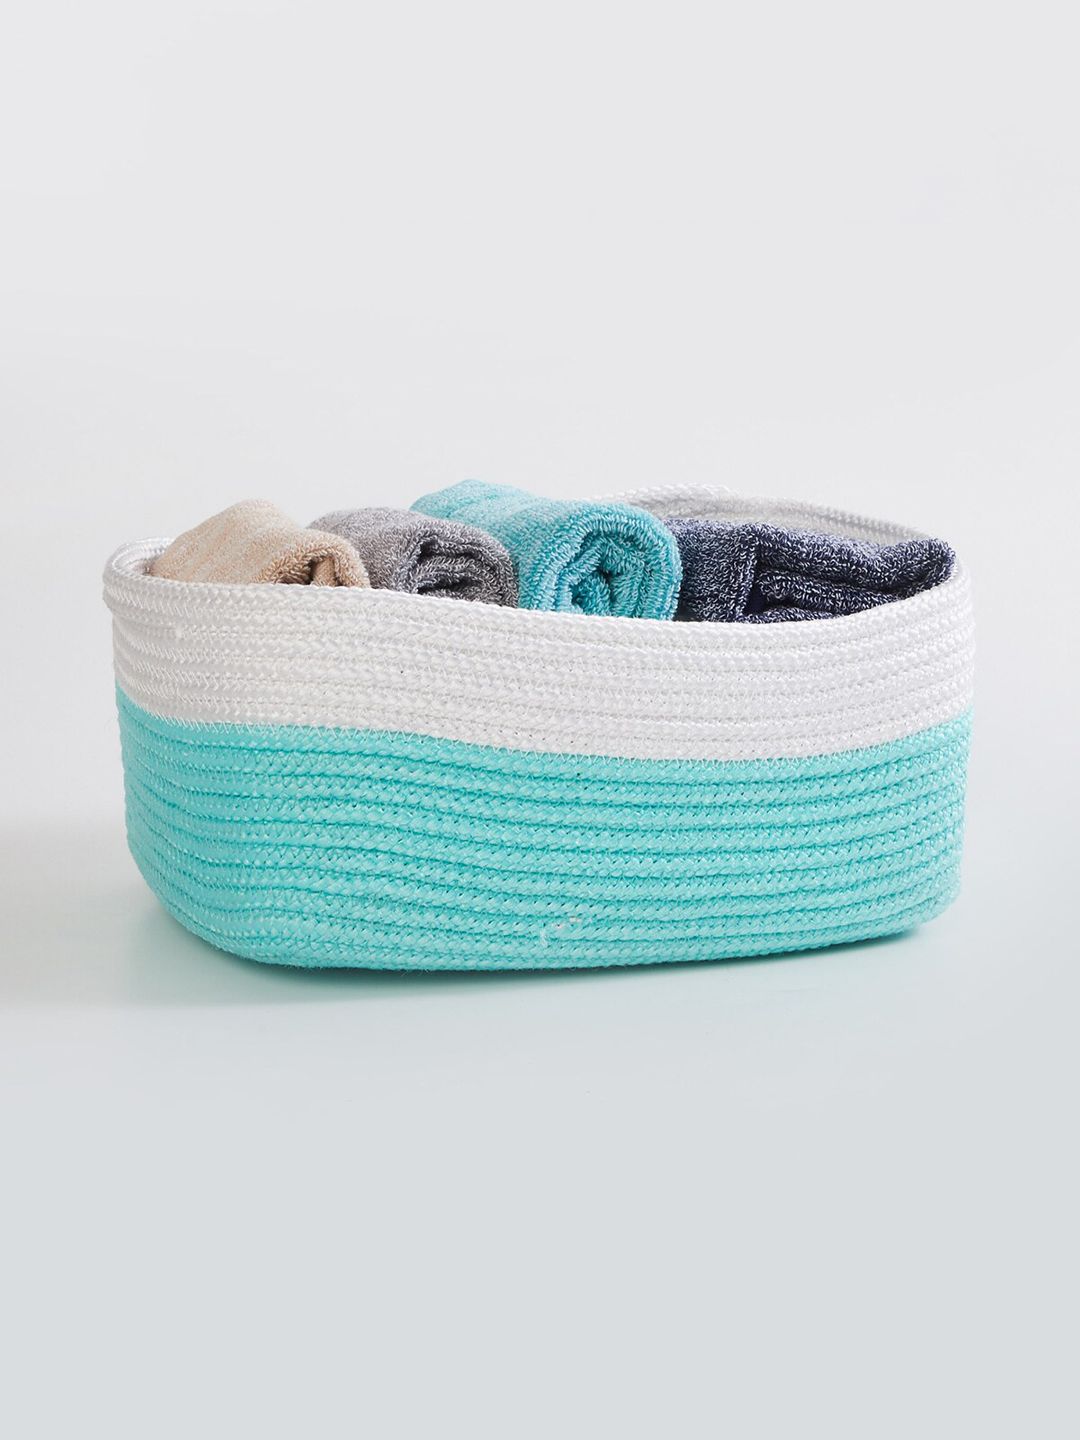 Home Centre Teal Blue & White Colourblocked Braided Laundry Basket Price in India